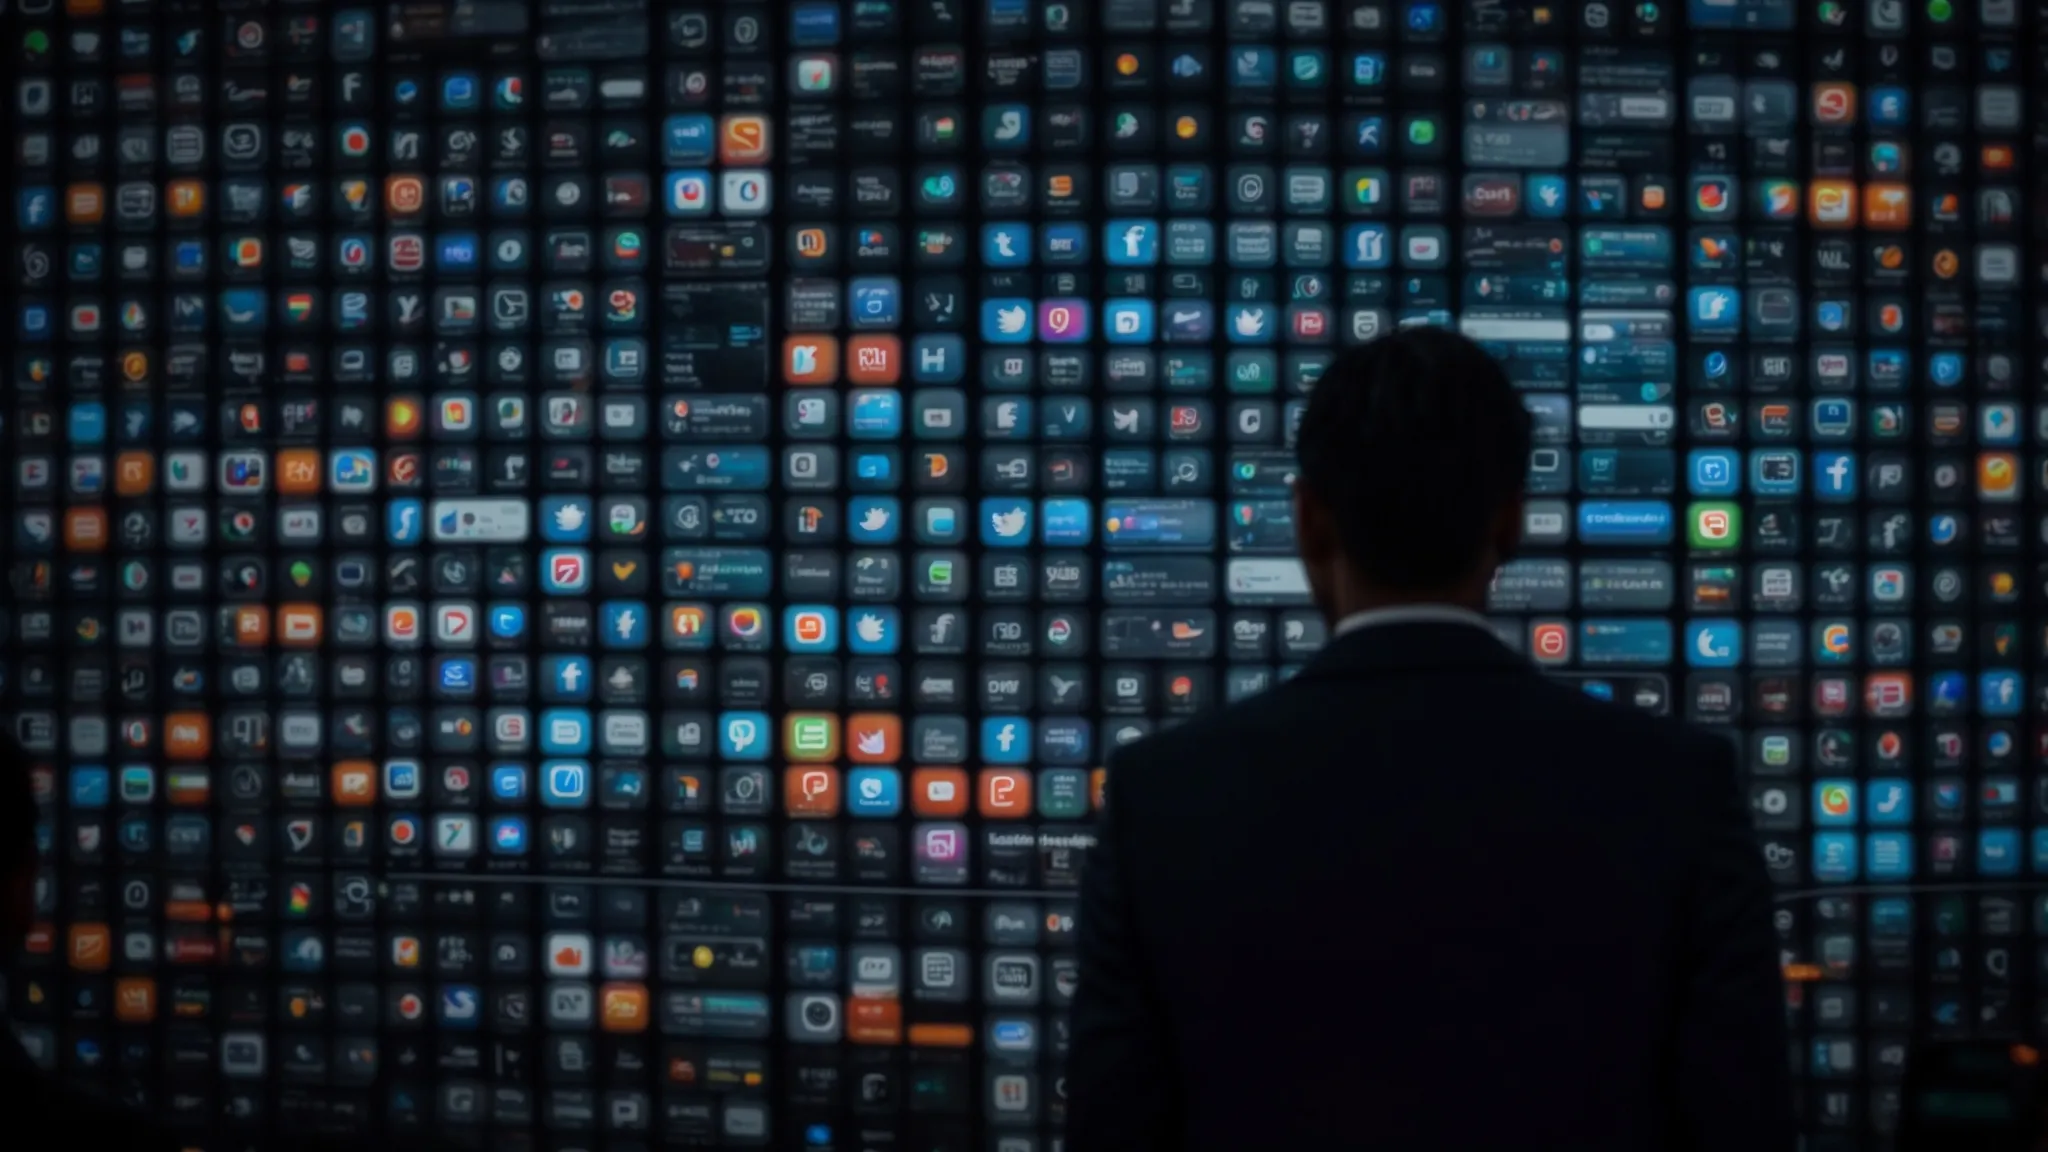 a financial advisor stands in front of a large, glowing screen displaying various social media icons, thoughtfully strategizing their next move.